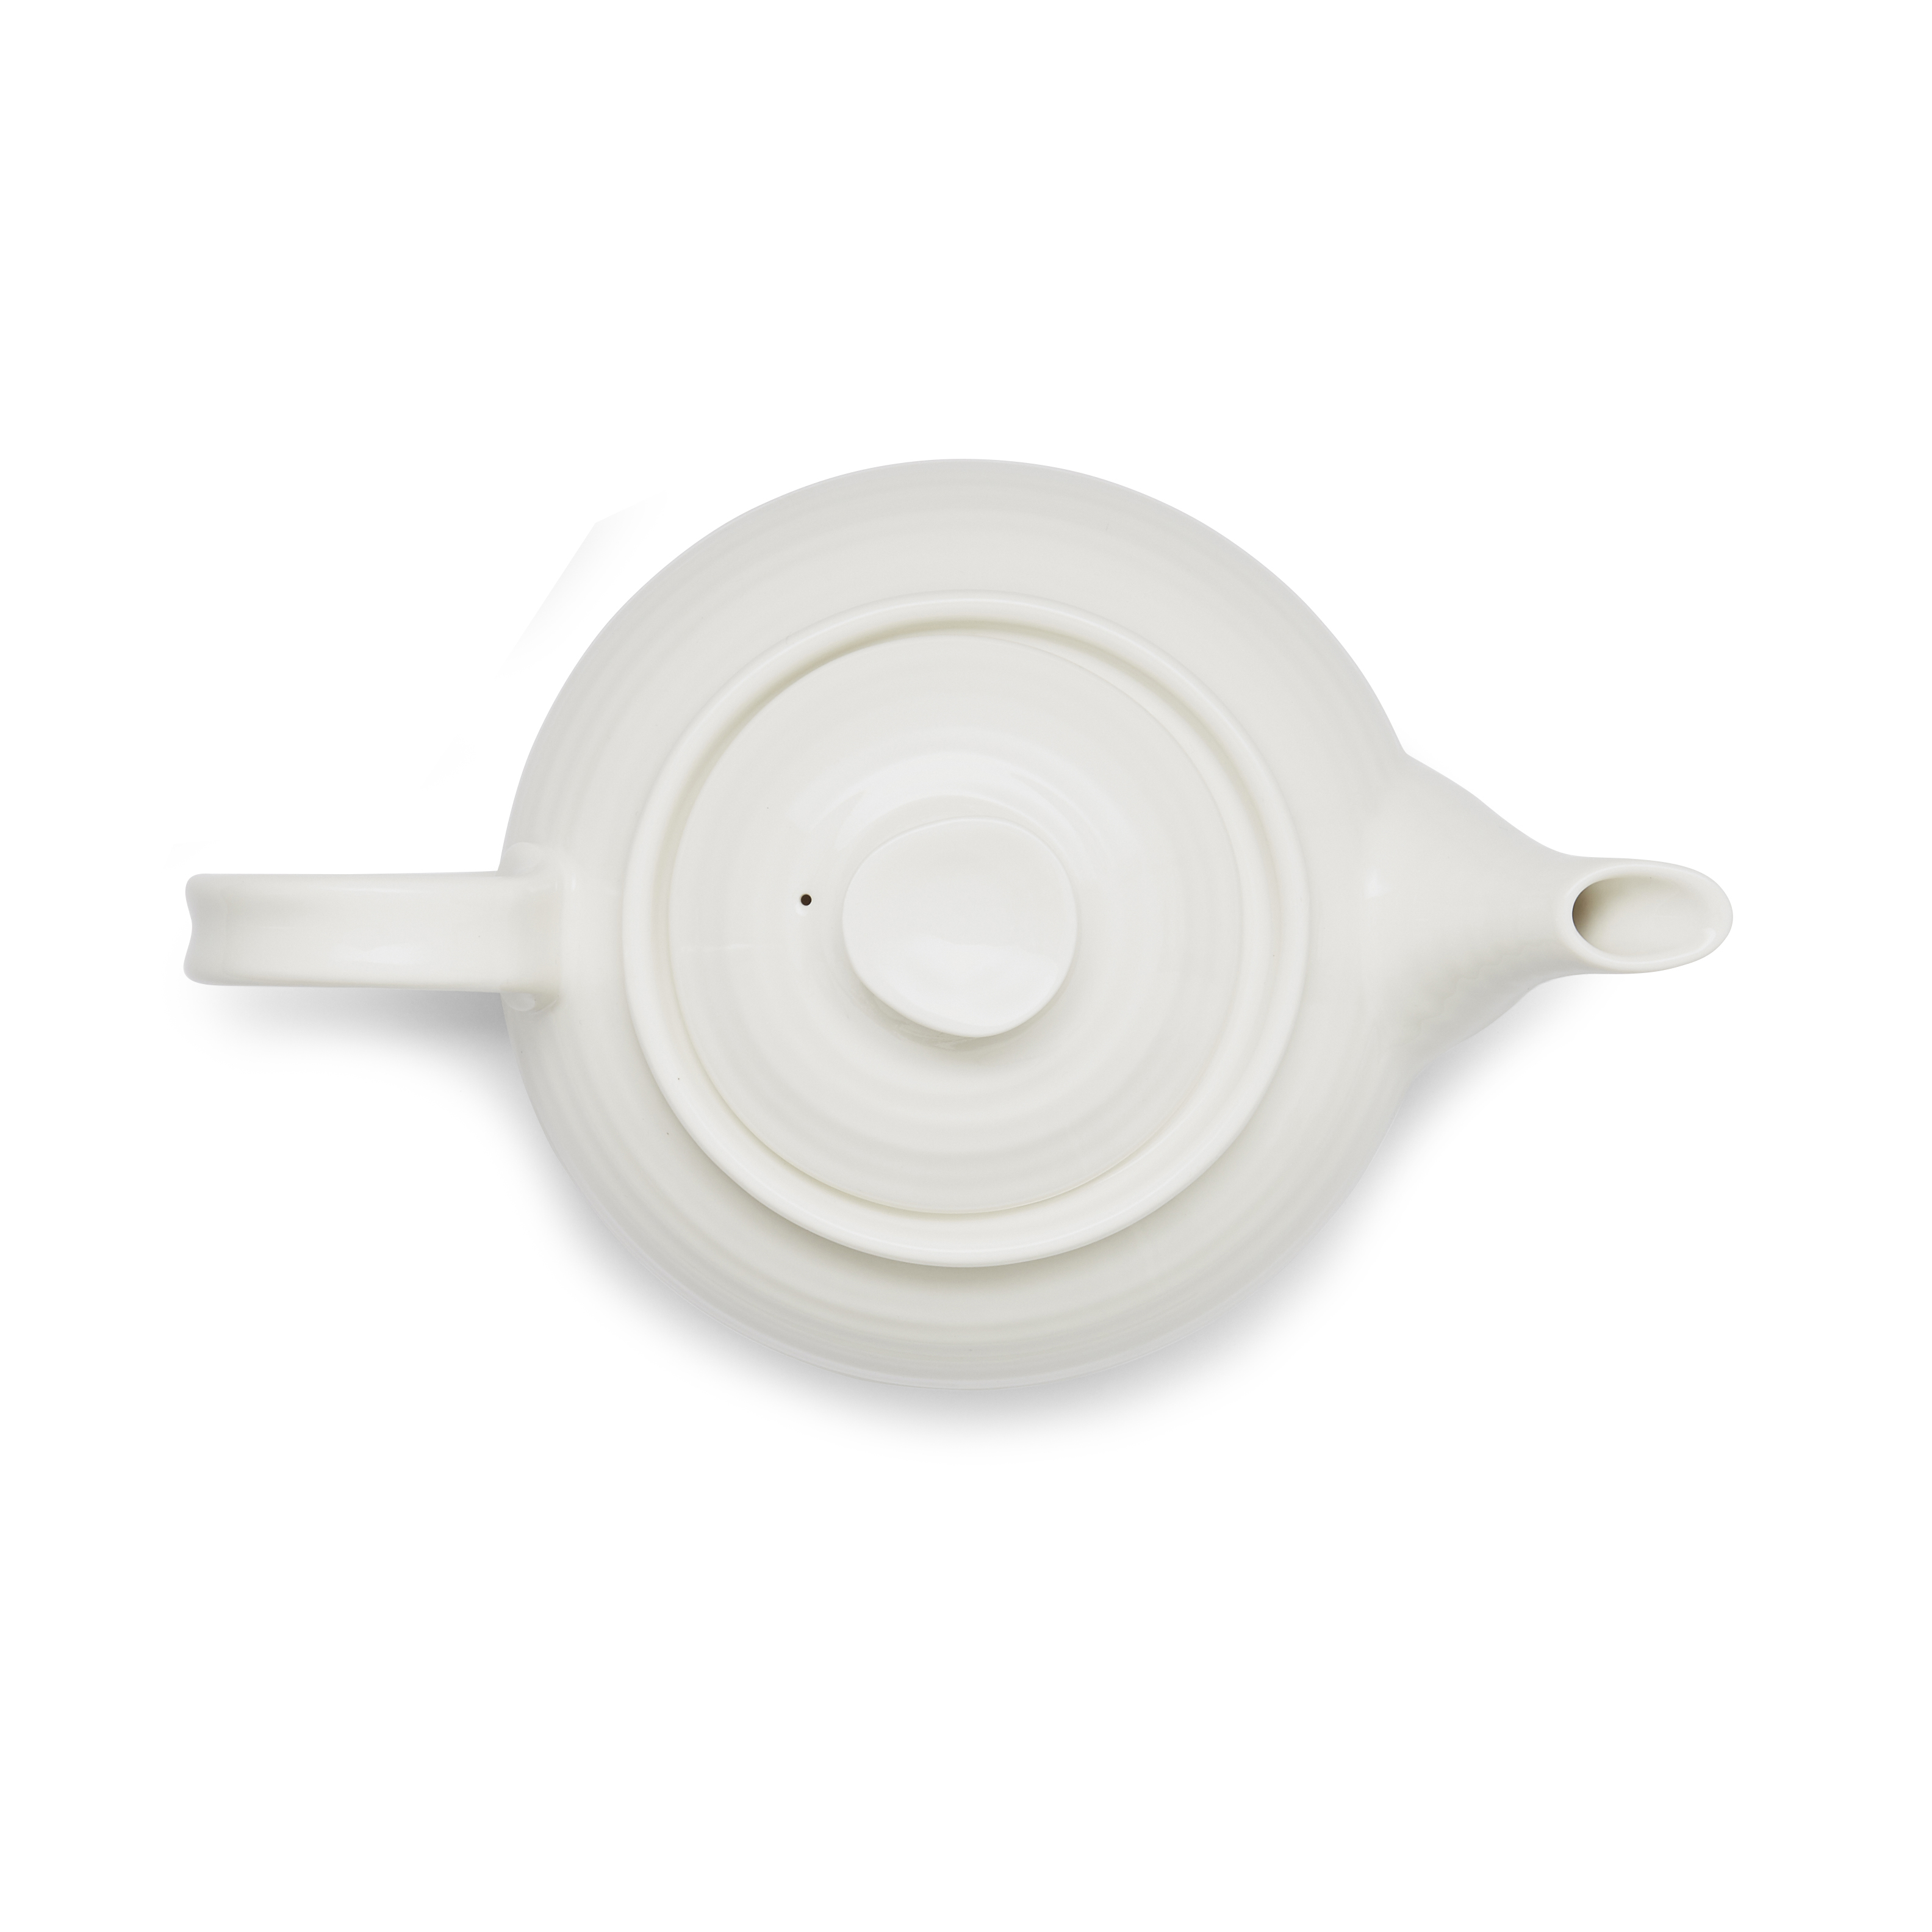 Sophie Conran 2 Pint Teapot, White image number null